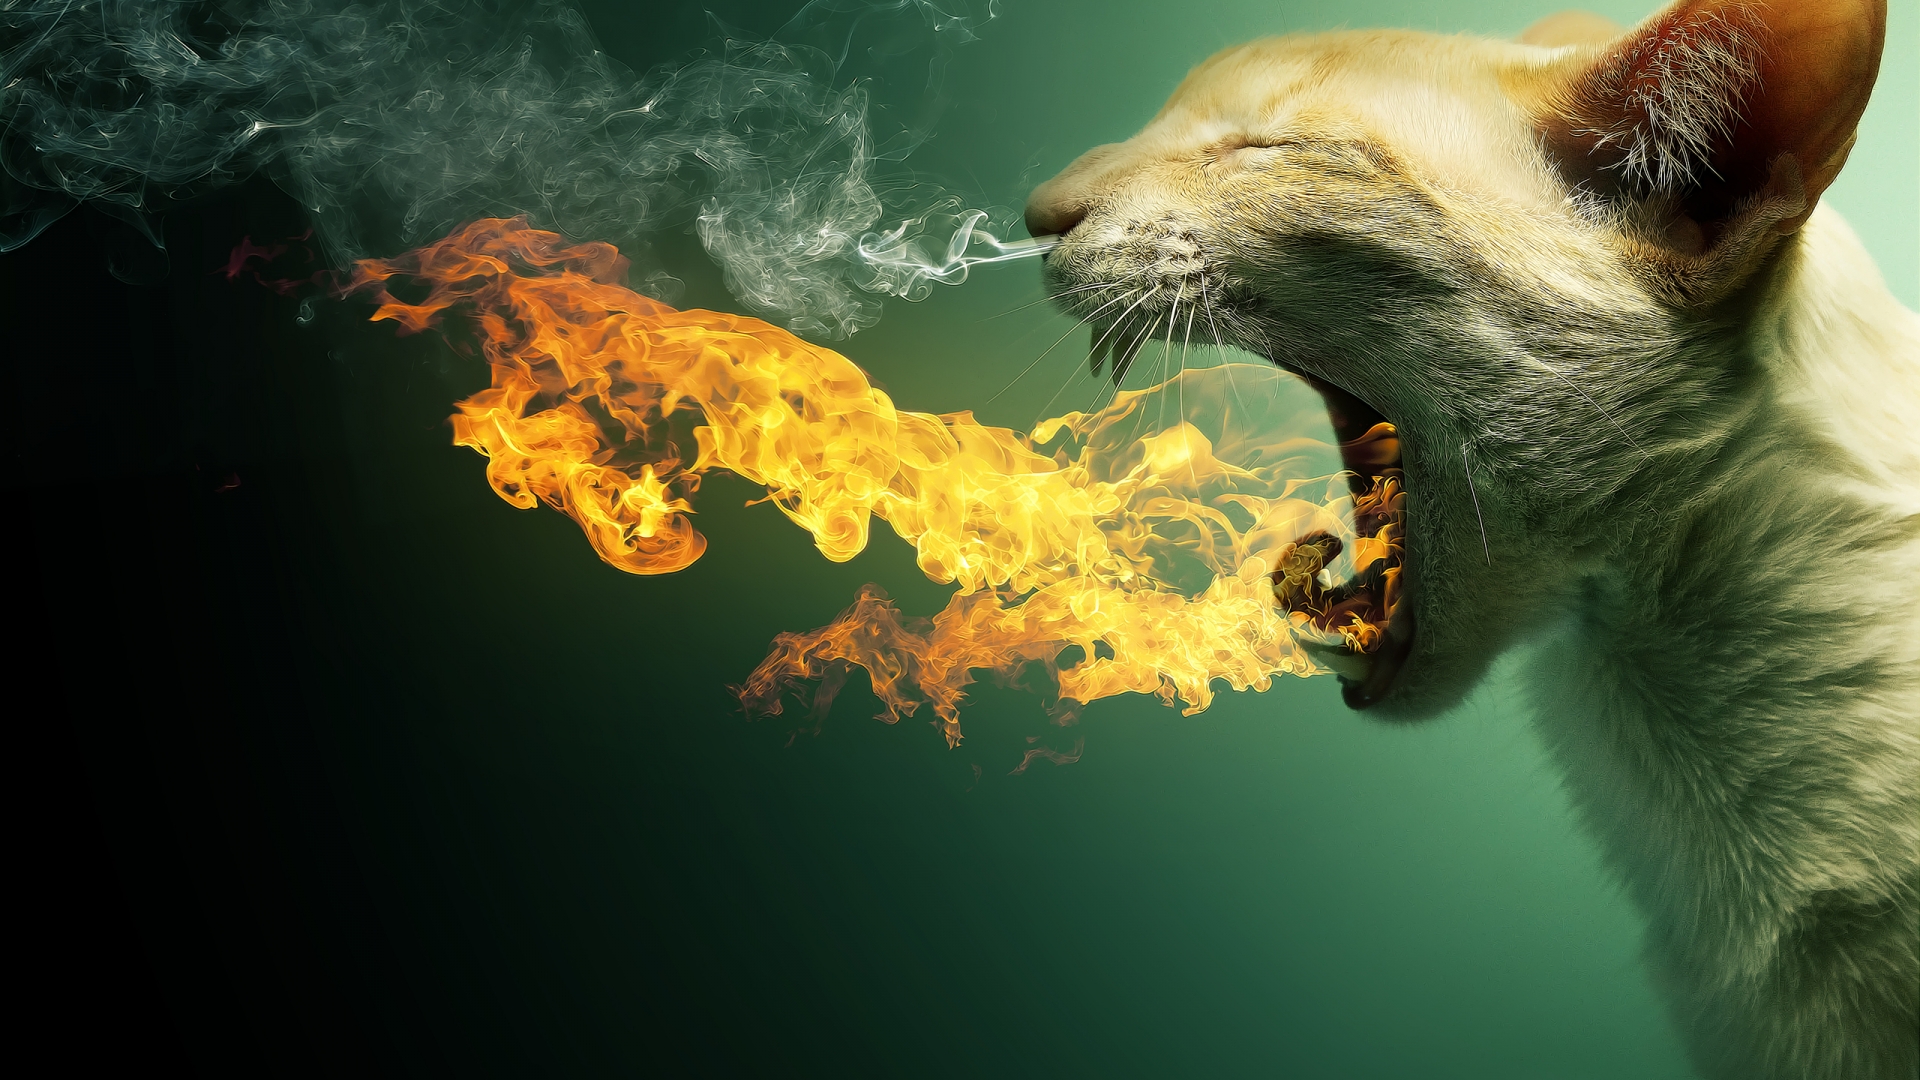 Cat in Fire for 1920 x 1080 HDTV 1080p resolution